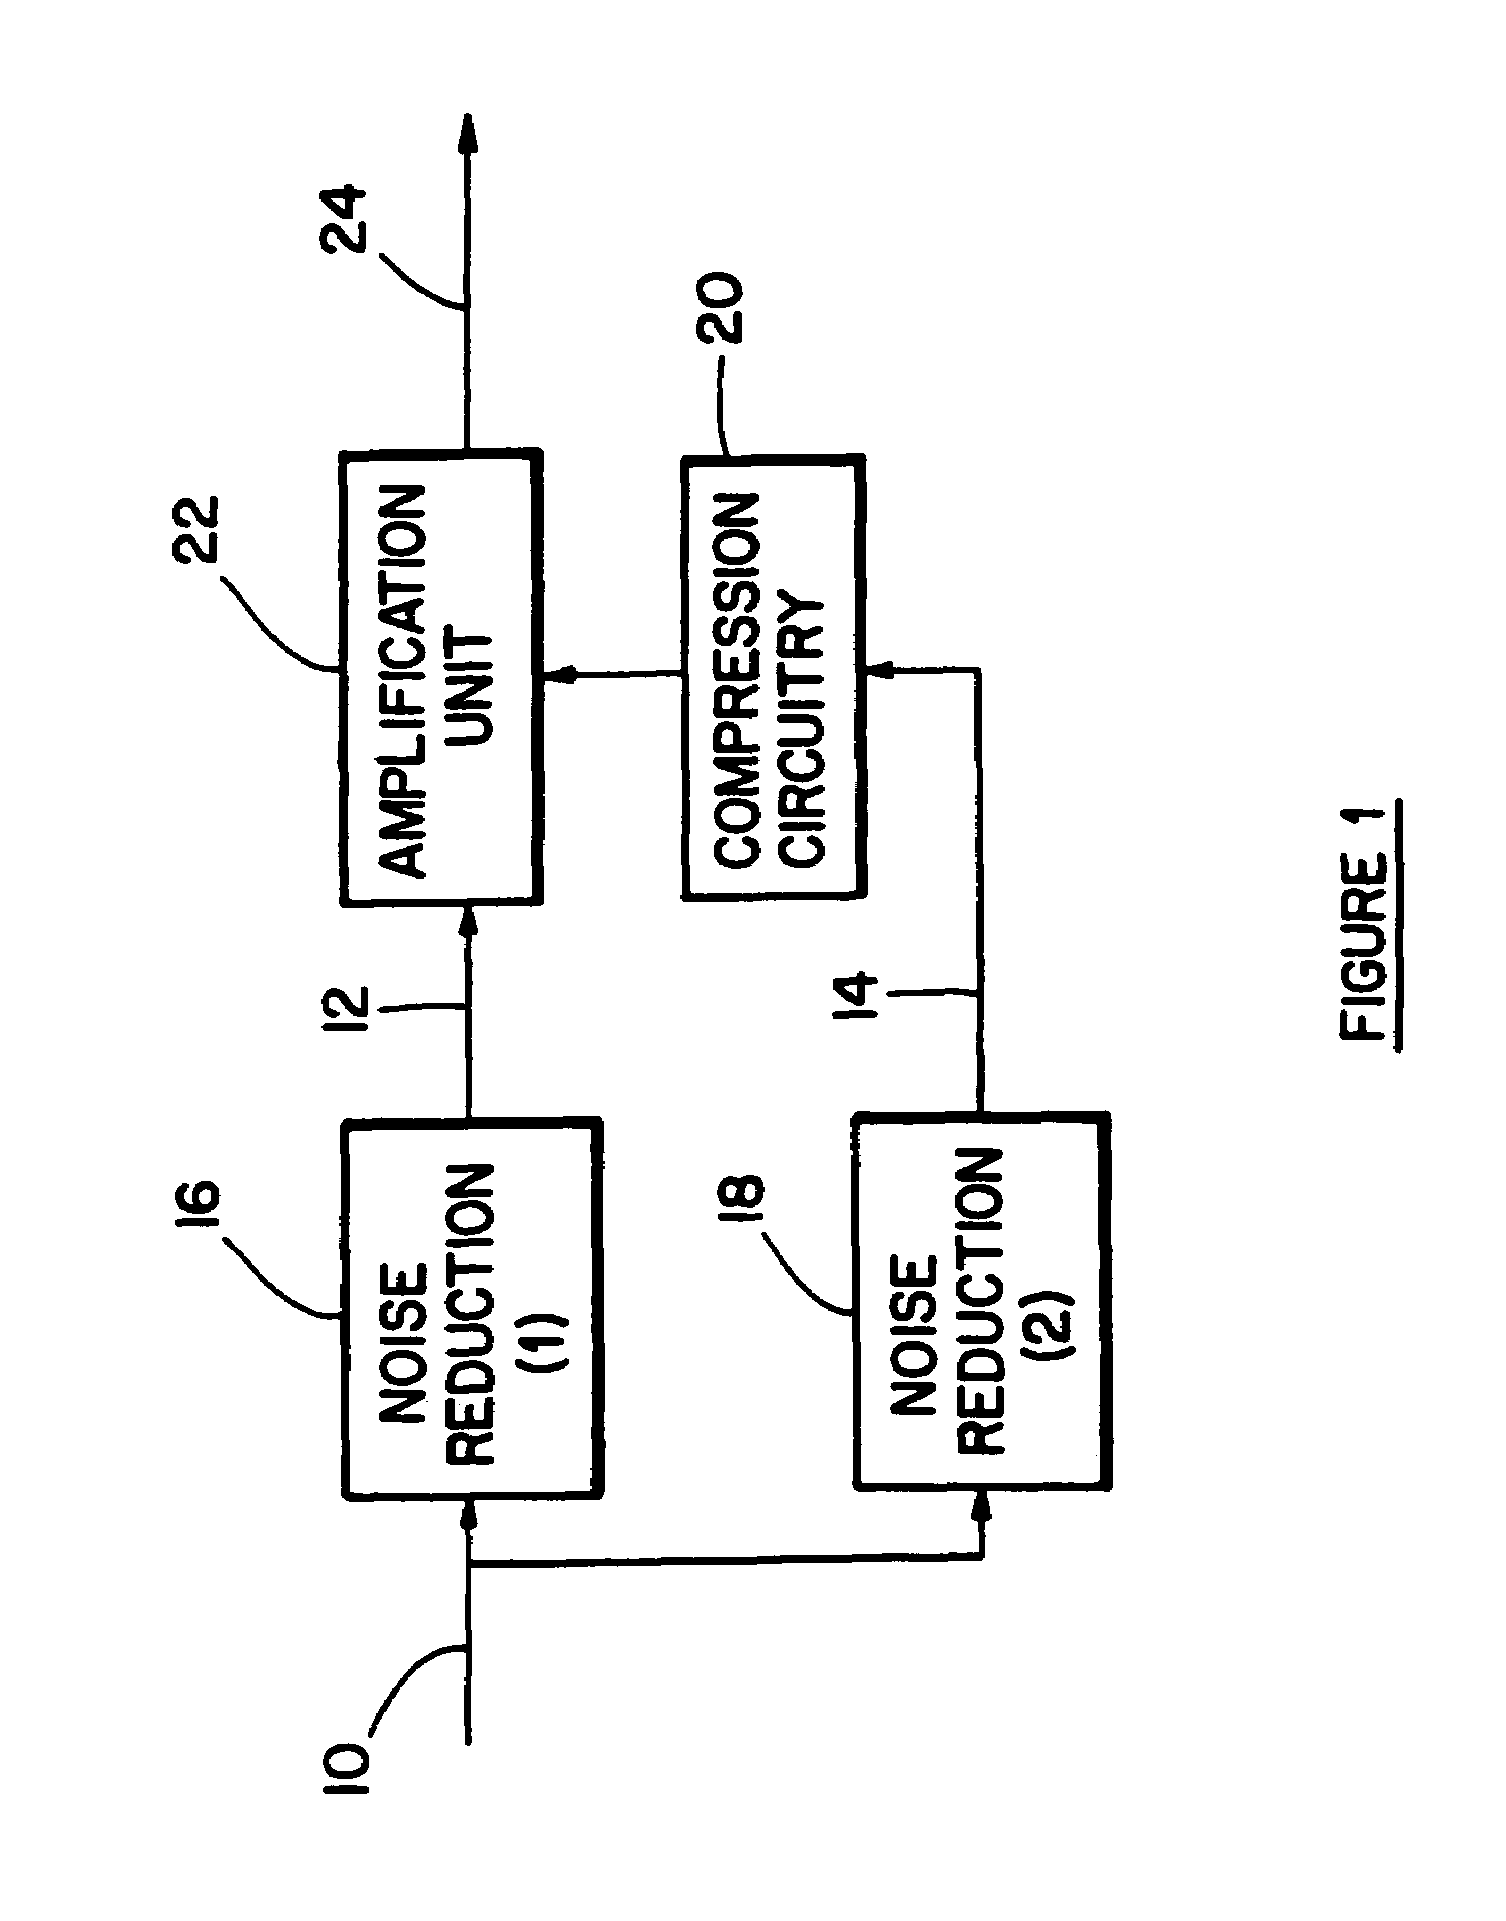 Method and apparatus for noise reduction particularly in hearing aids